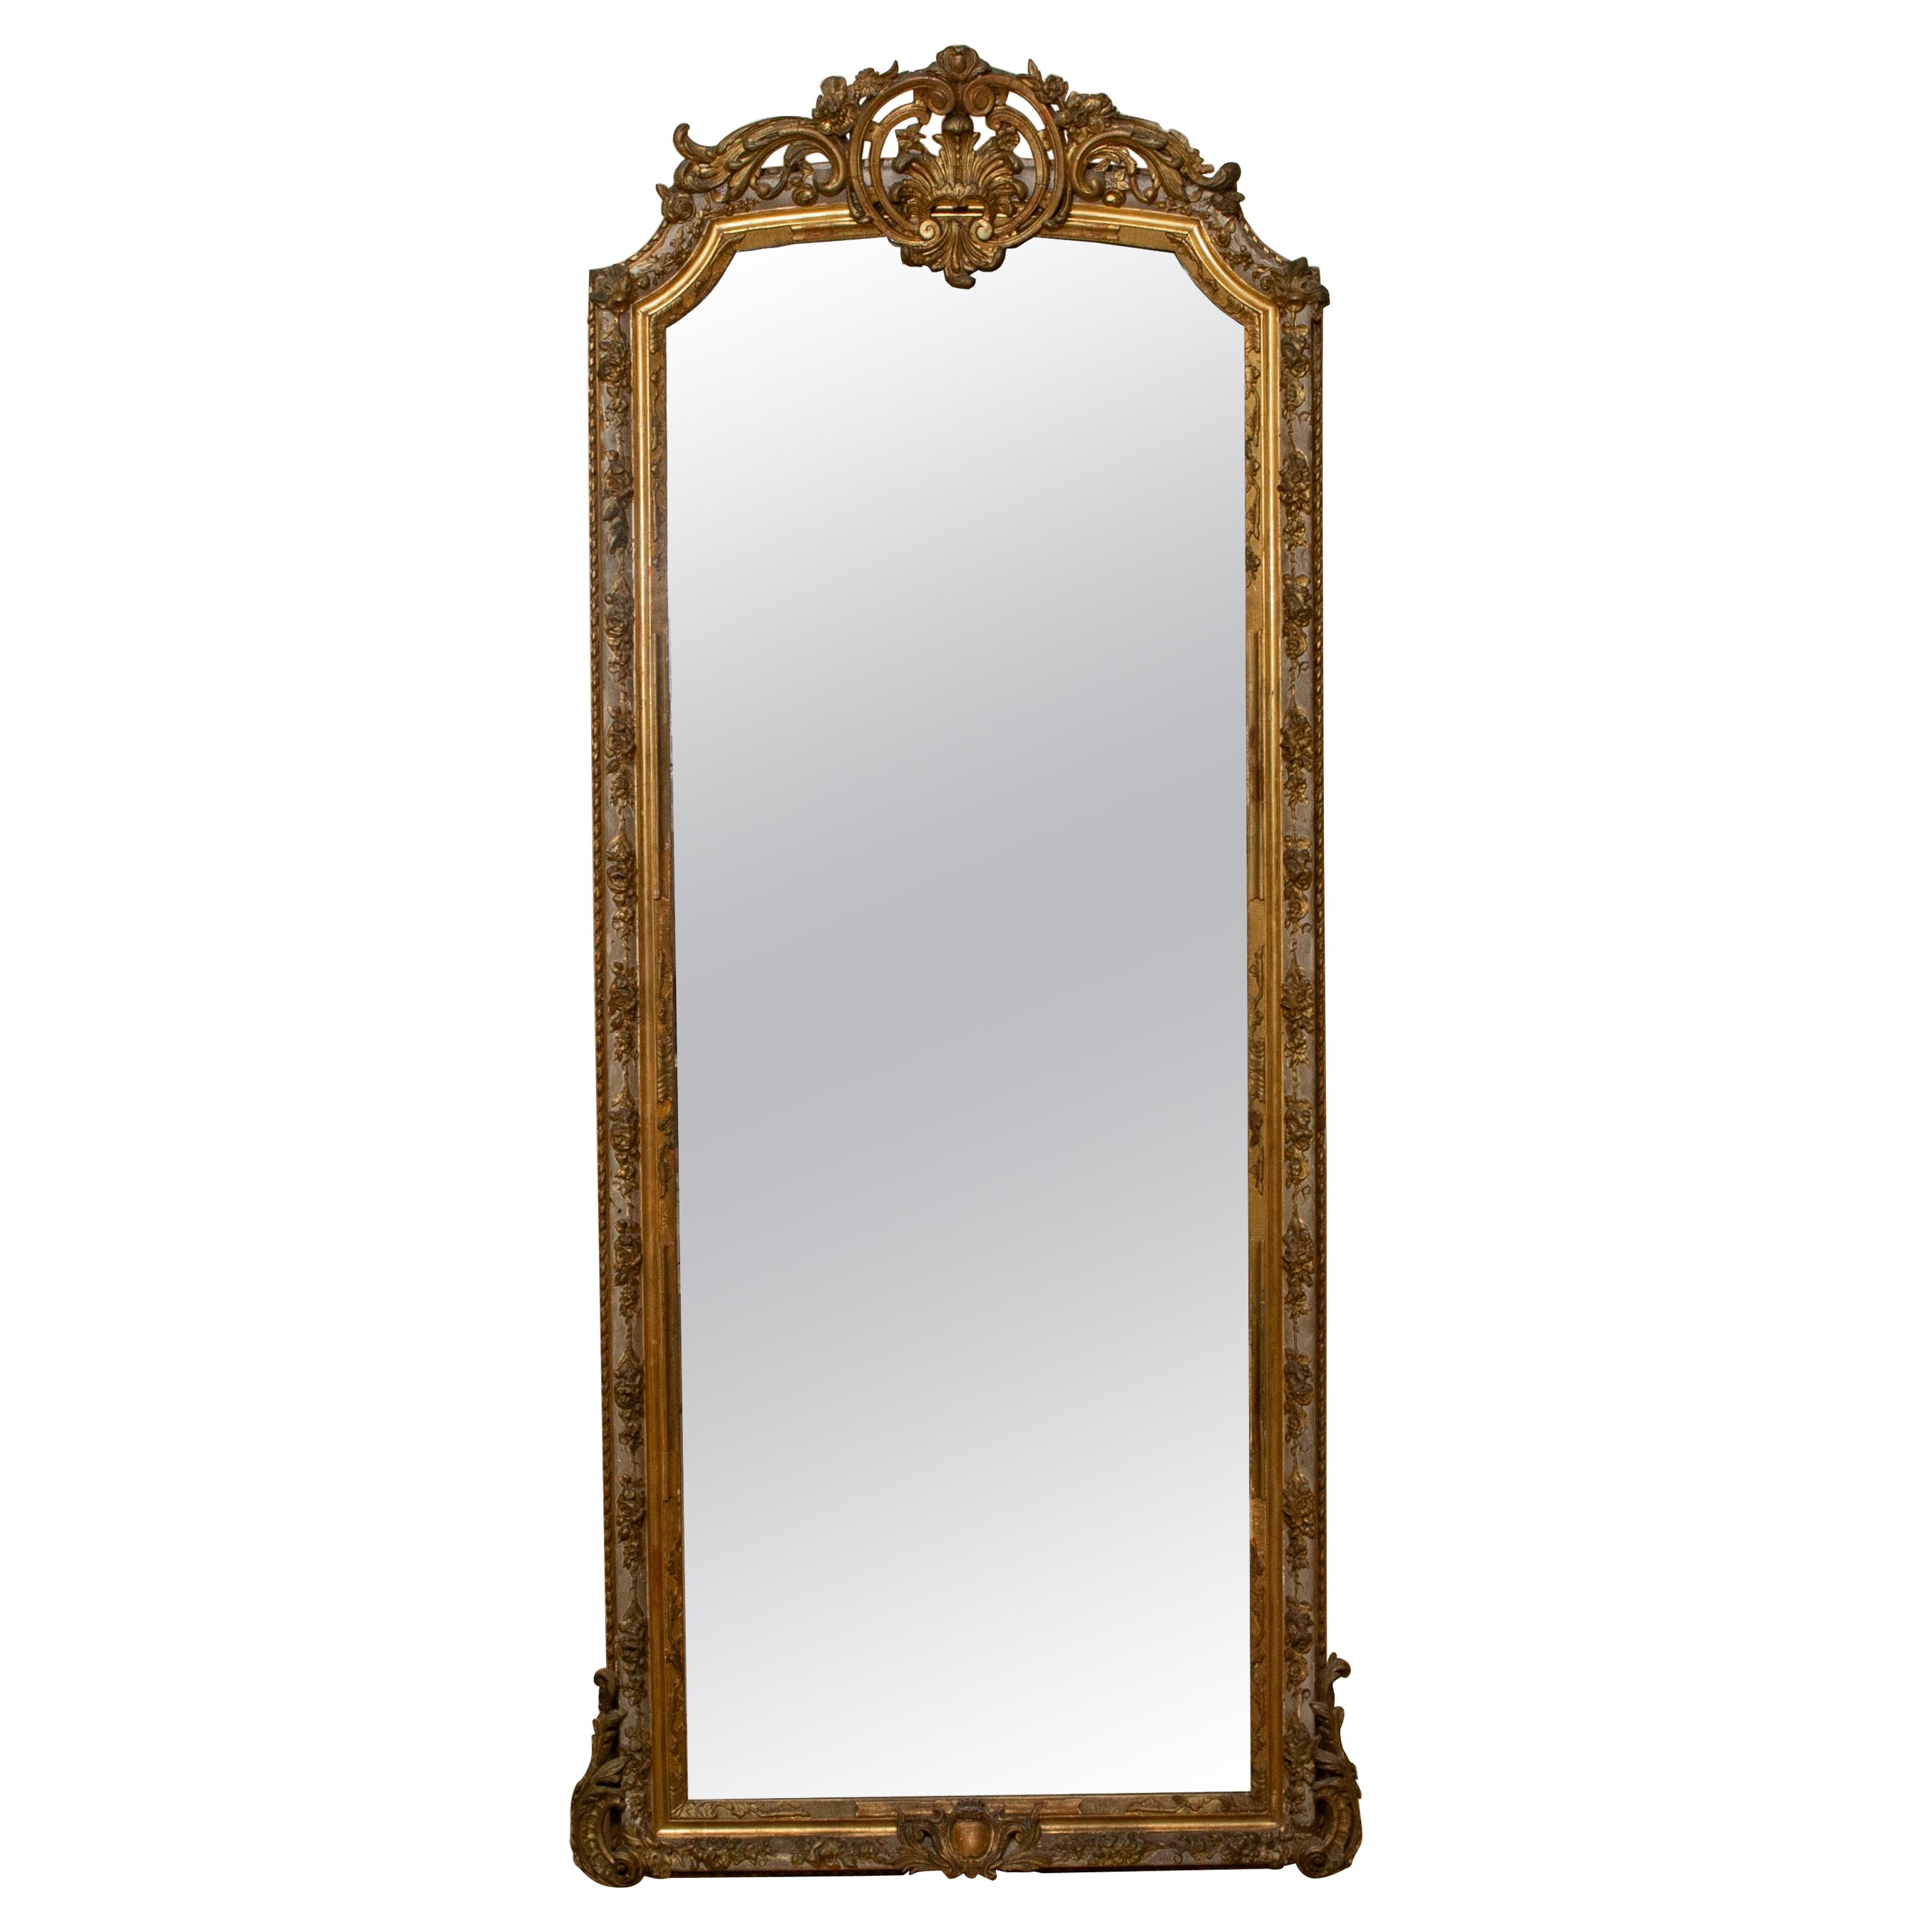 Mid-19th Century French Regency Style Gilt Wood Full Length Mirror, 87-in Tall For Sale